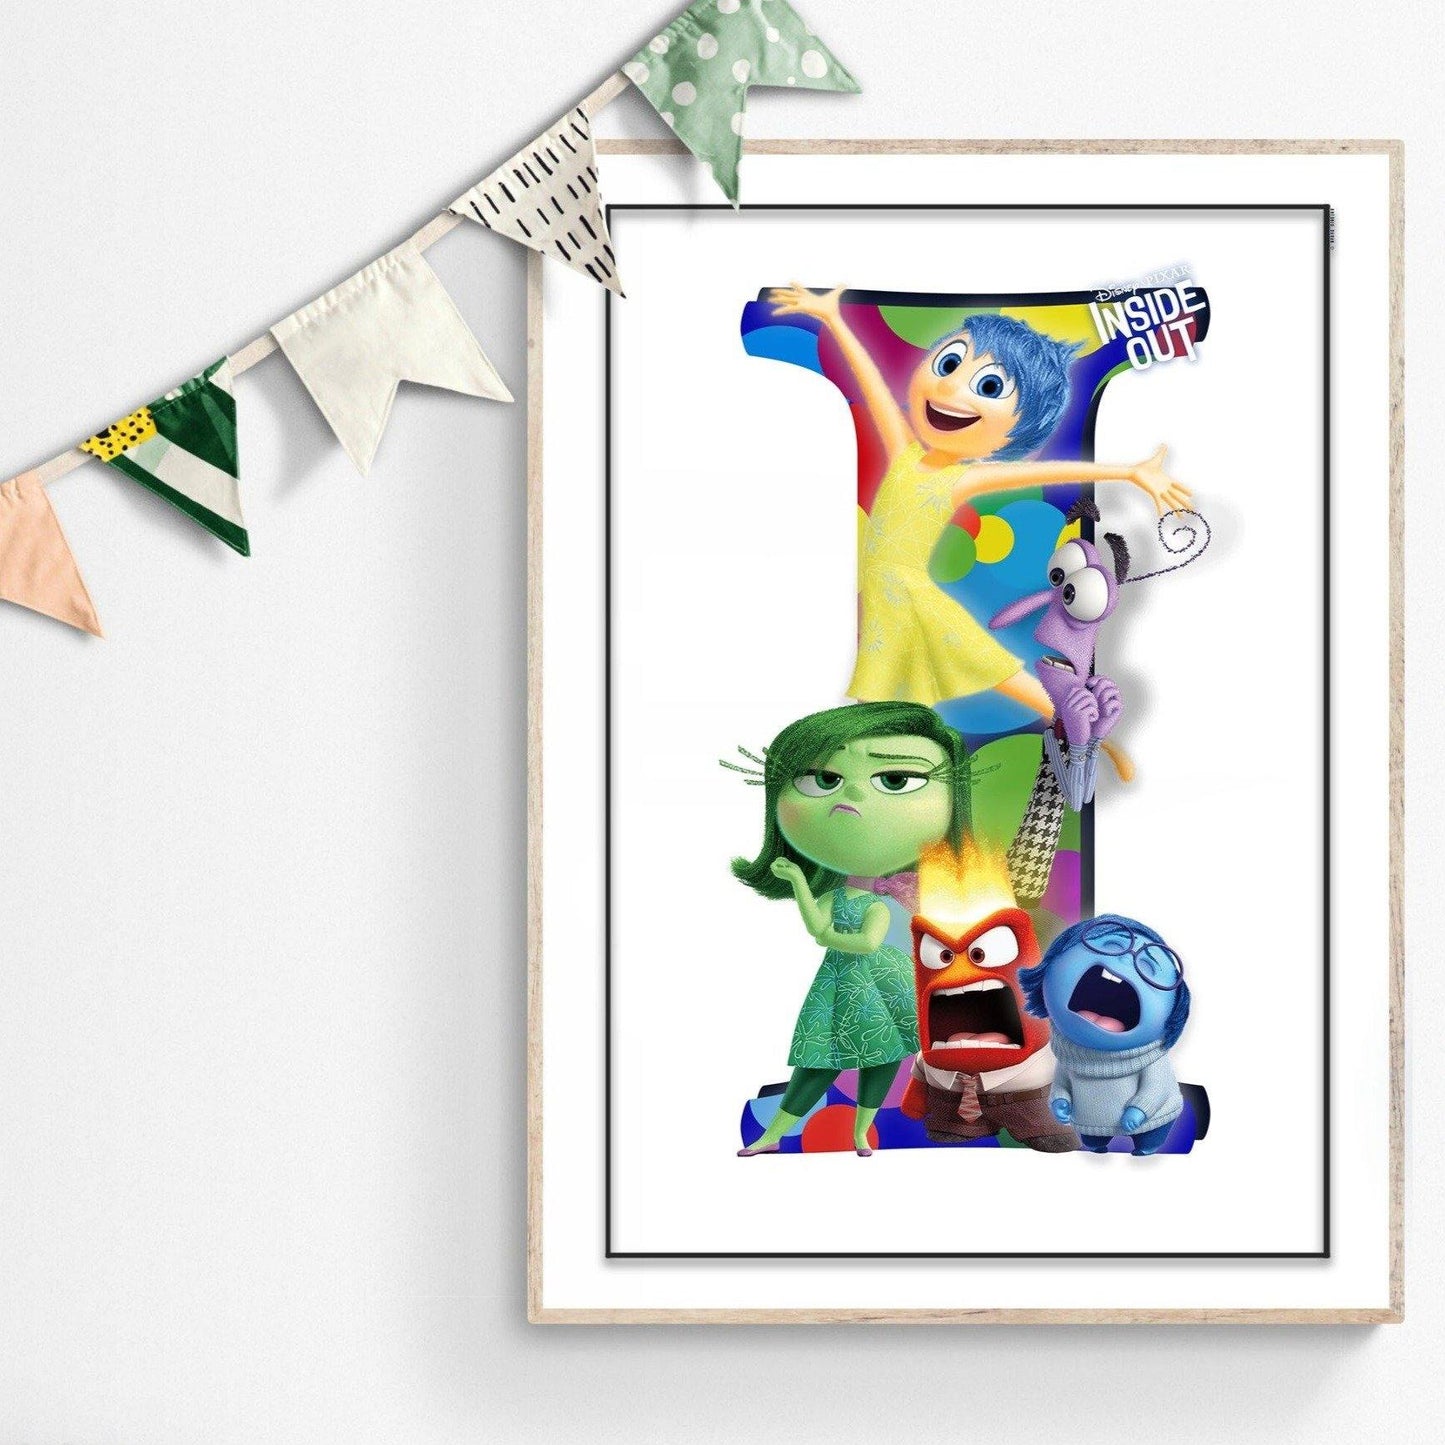 This Inside Out Movie Poster is a perfect addition to any Disney World movies section. It creates a stunning visual with its vibrant colors, quality fine art prints and classic Disney characters. It is an ideal way to add a touch of Disney movie magic to any room wall. 98types